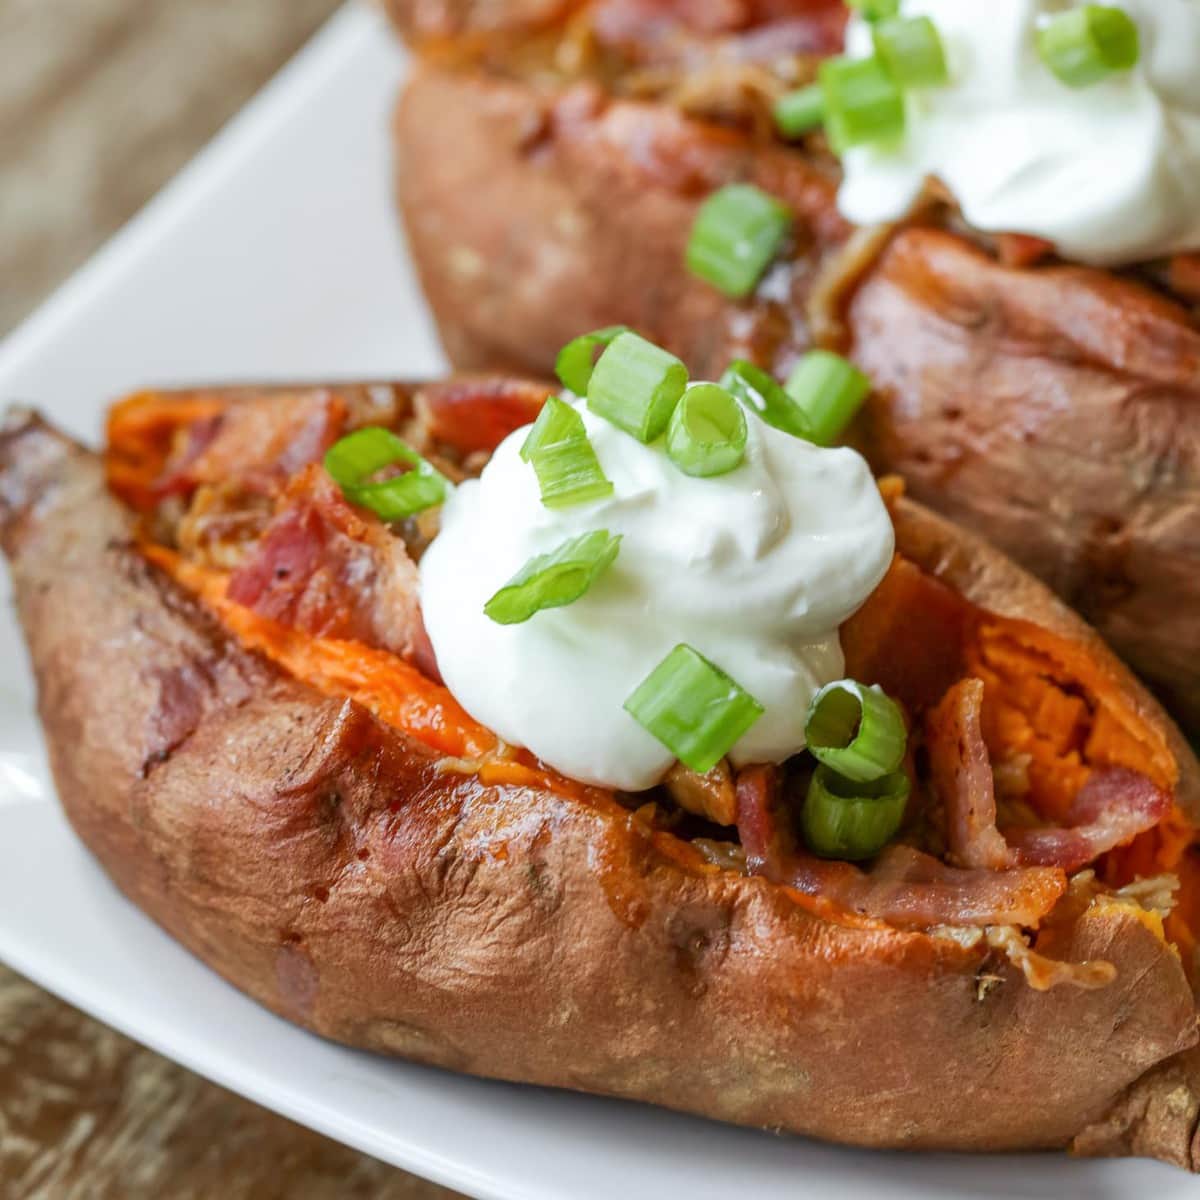 Fall dinner ideas - pork stuffed sweet potatoes topped with sour cream and green onions.